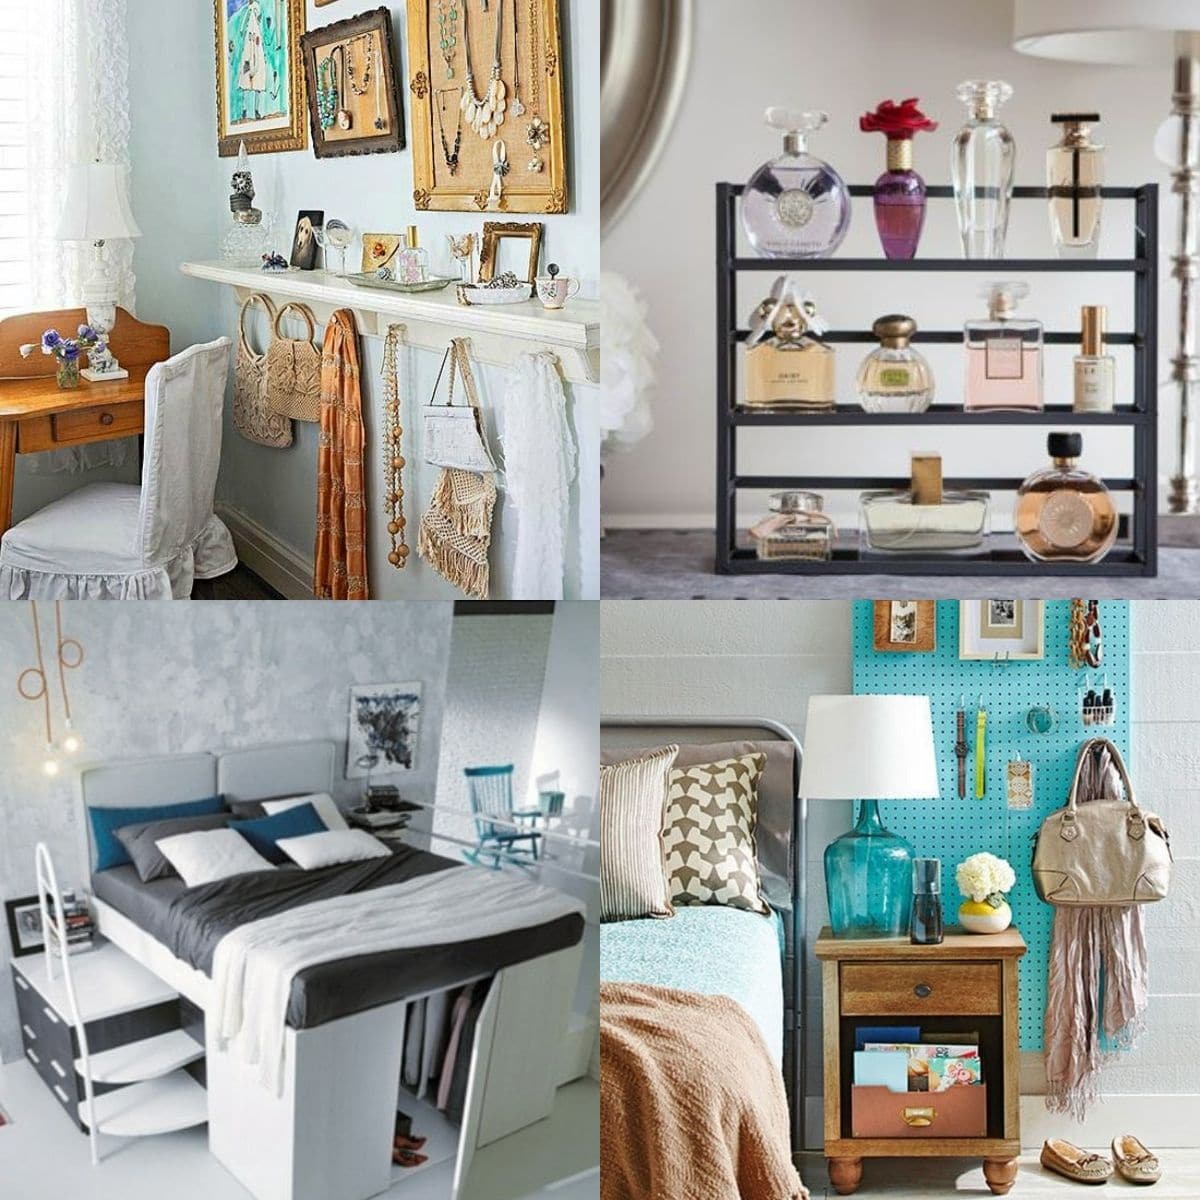 Increase storage in your small rooms with the fun hacks.

Keep your room both organized and stylish. 😉

#Storage #StorageIDeas #StorageSpace #SmallRooms #SmallRoomStorage #SmallRoomStorageIDeas

 LocalInfoForYou.com/339781/small-r…